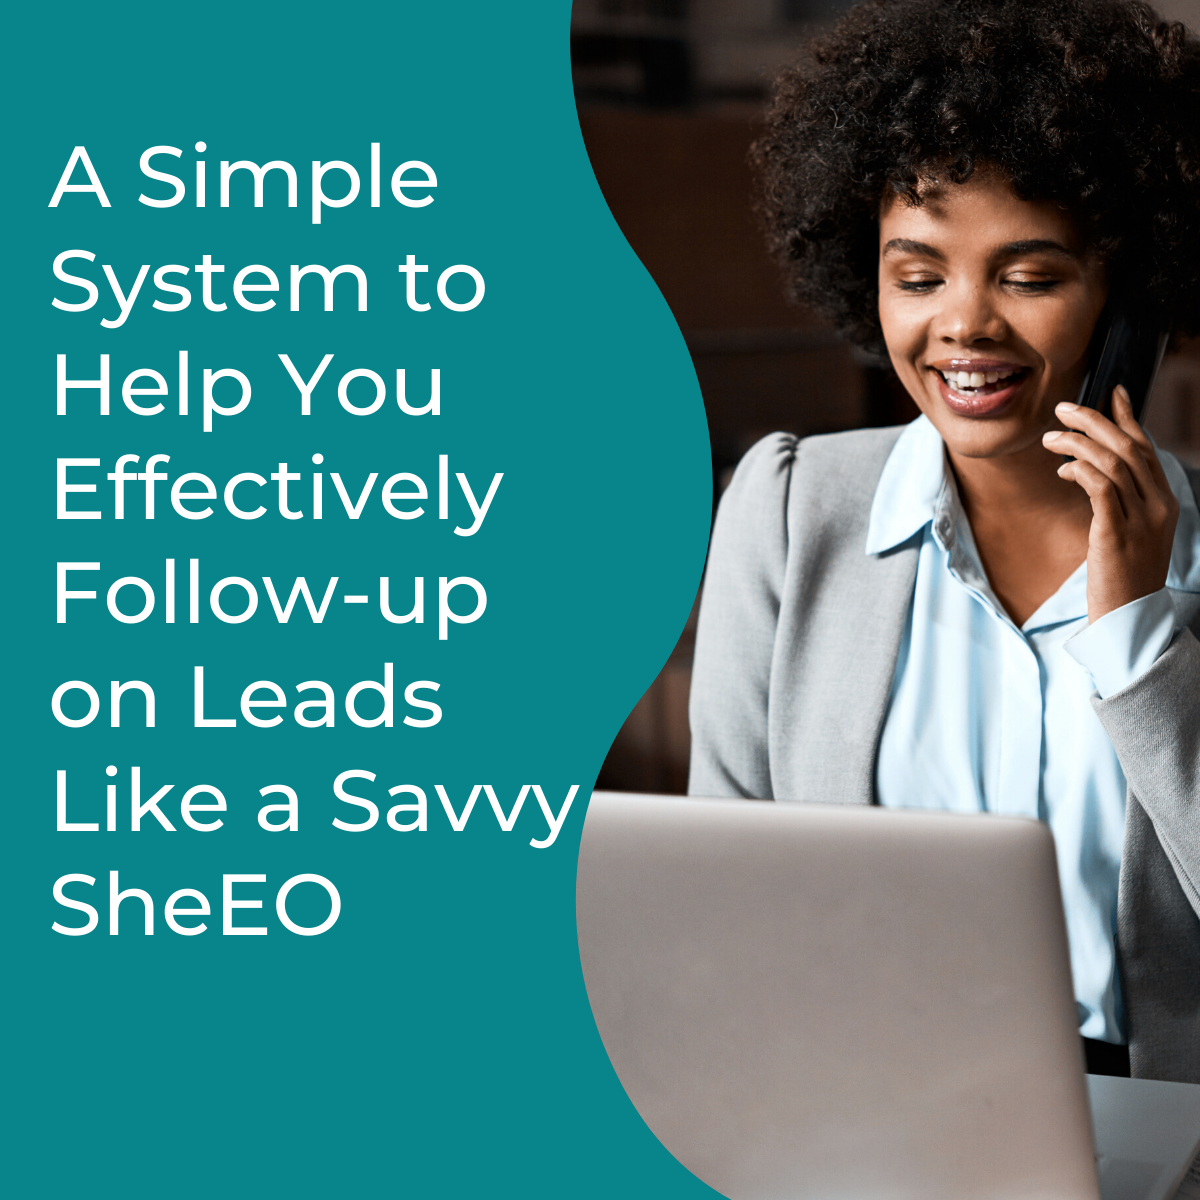 You are currently viewing A Simple System to Help You Effectively Follow-up on Leads Like a Savvy SheEO